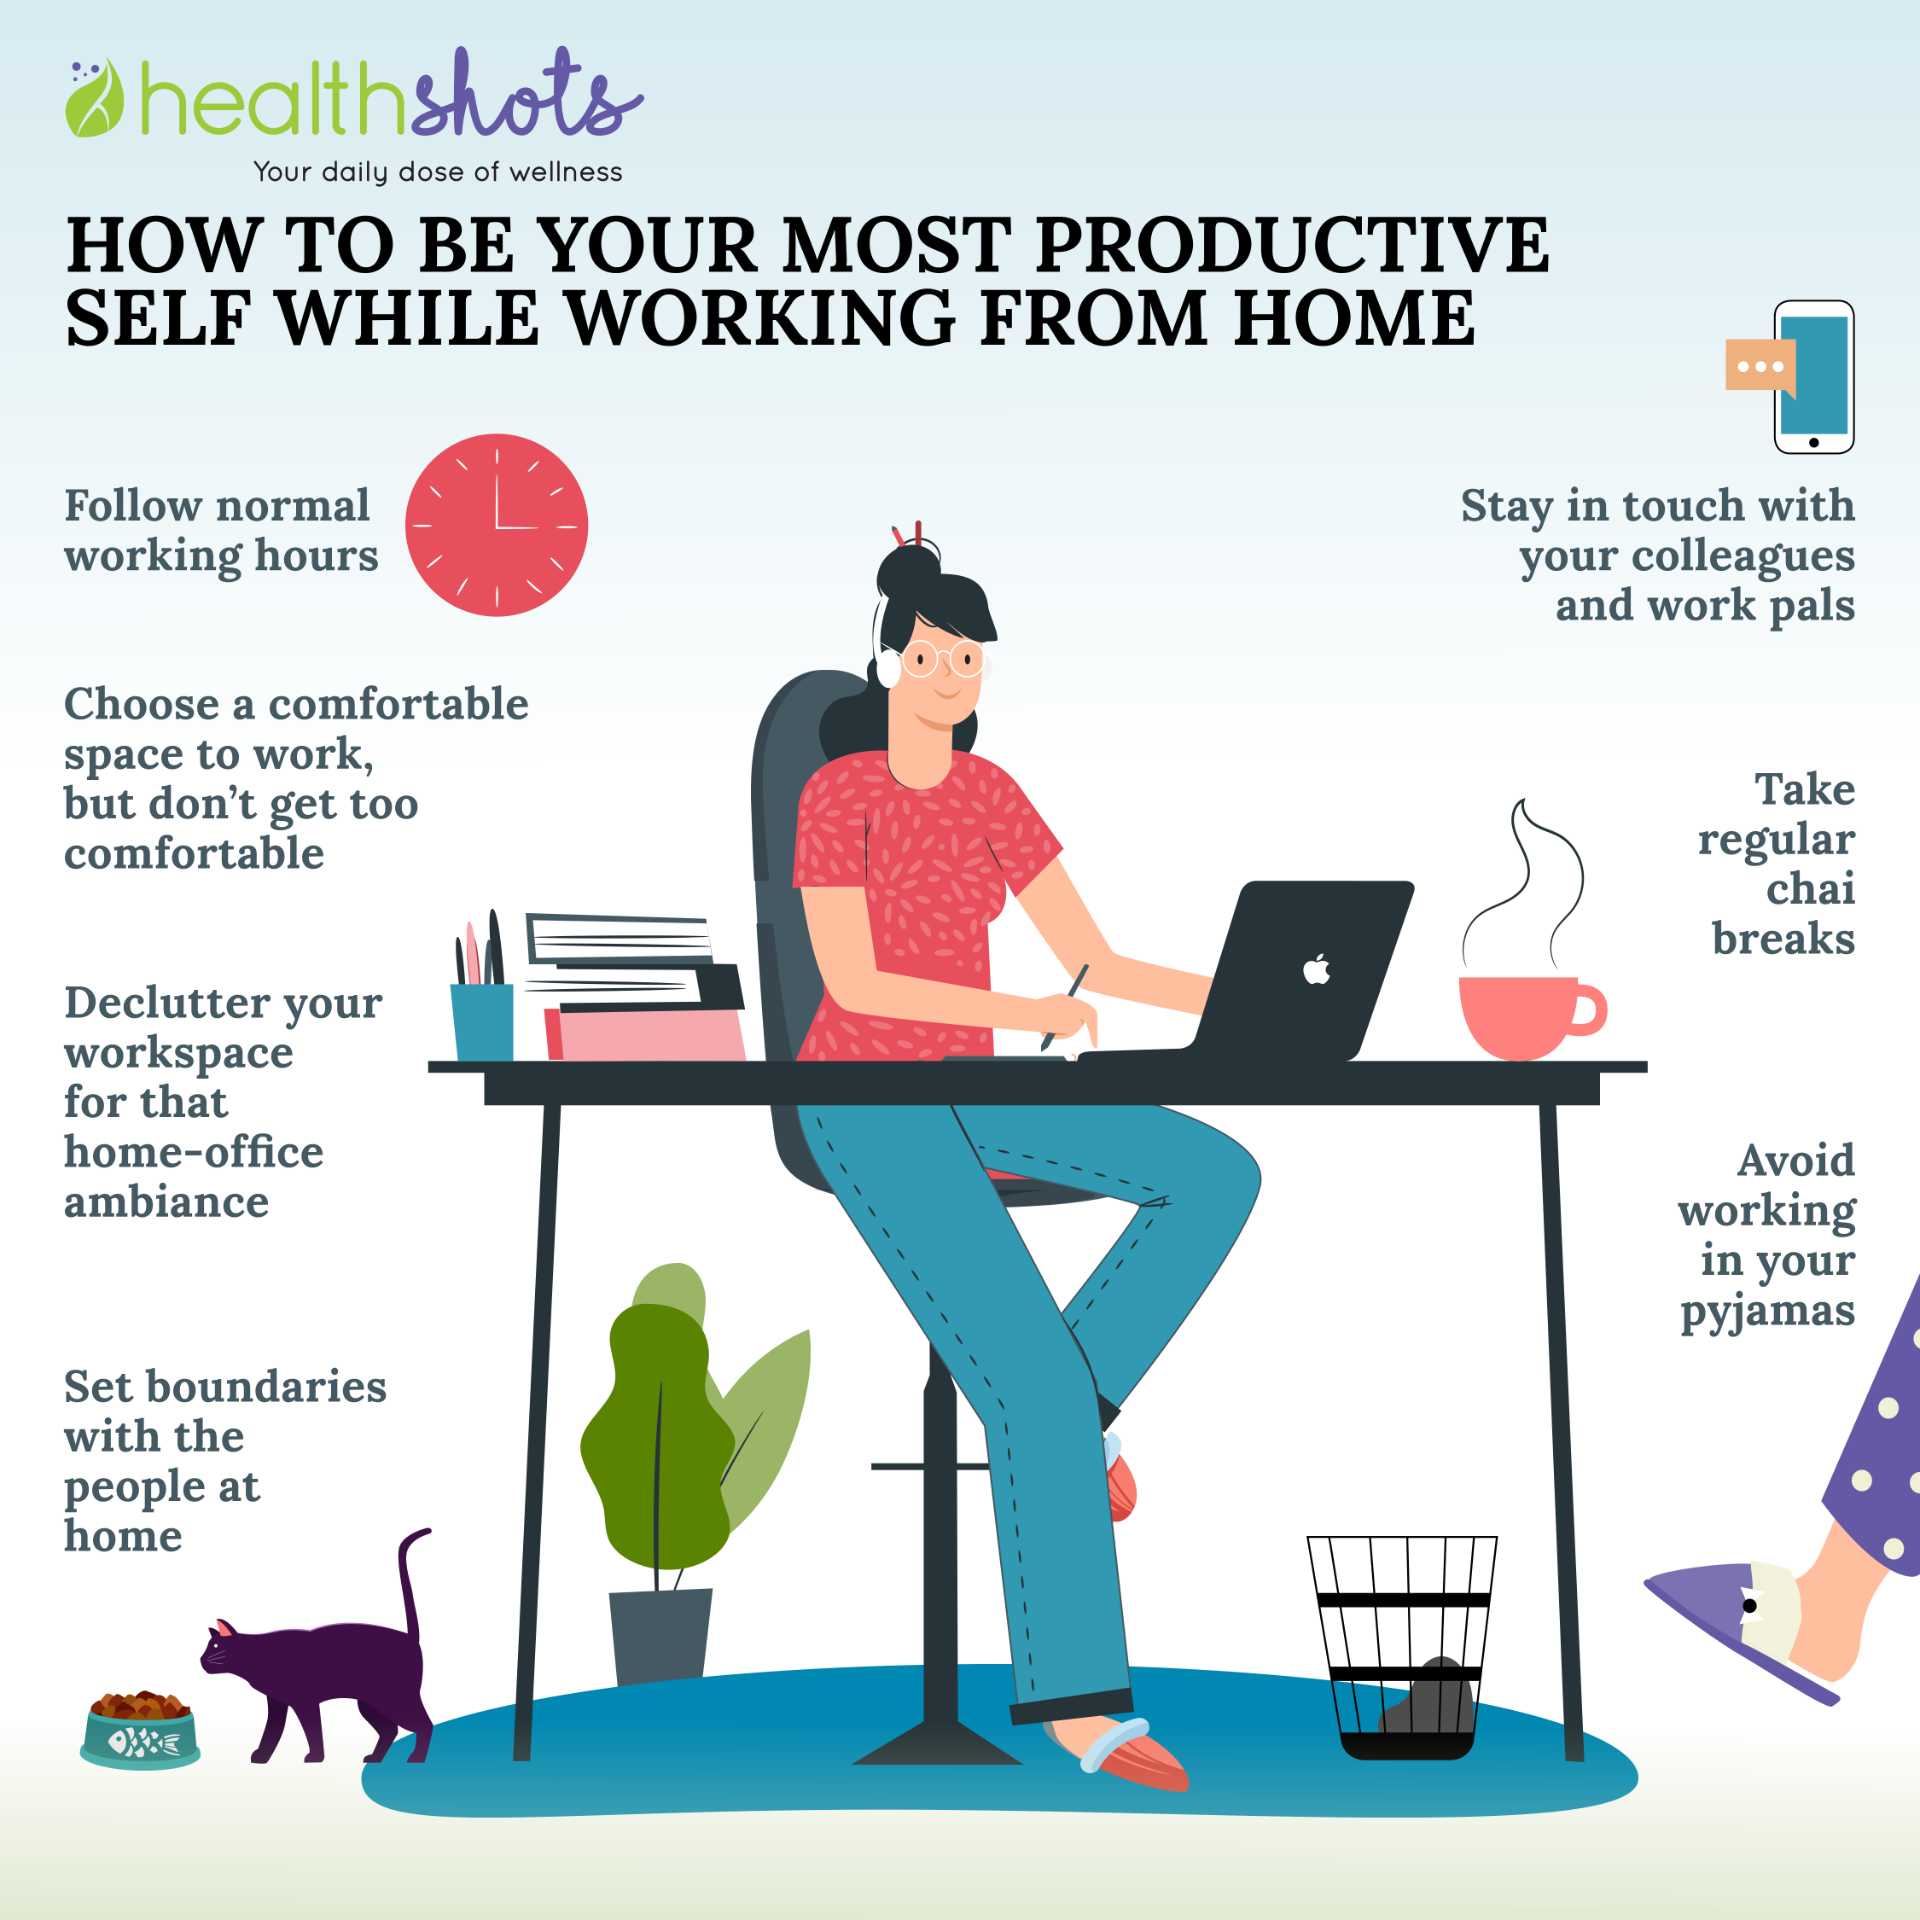 home workers more productive